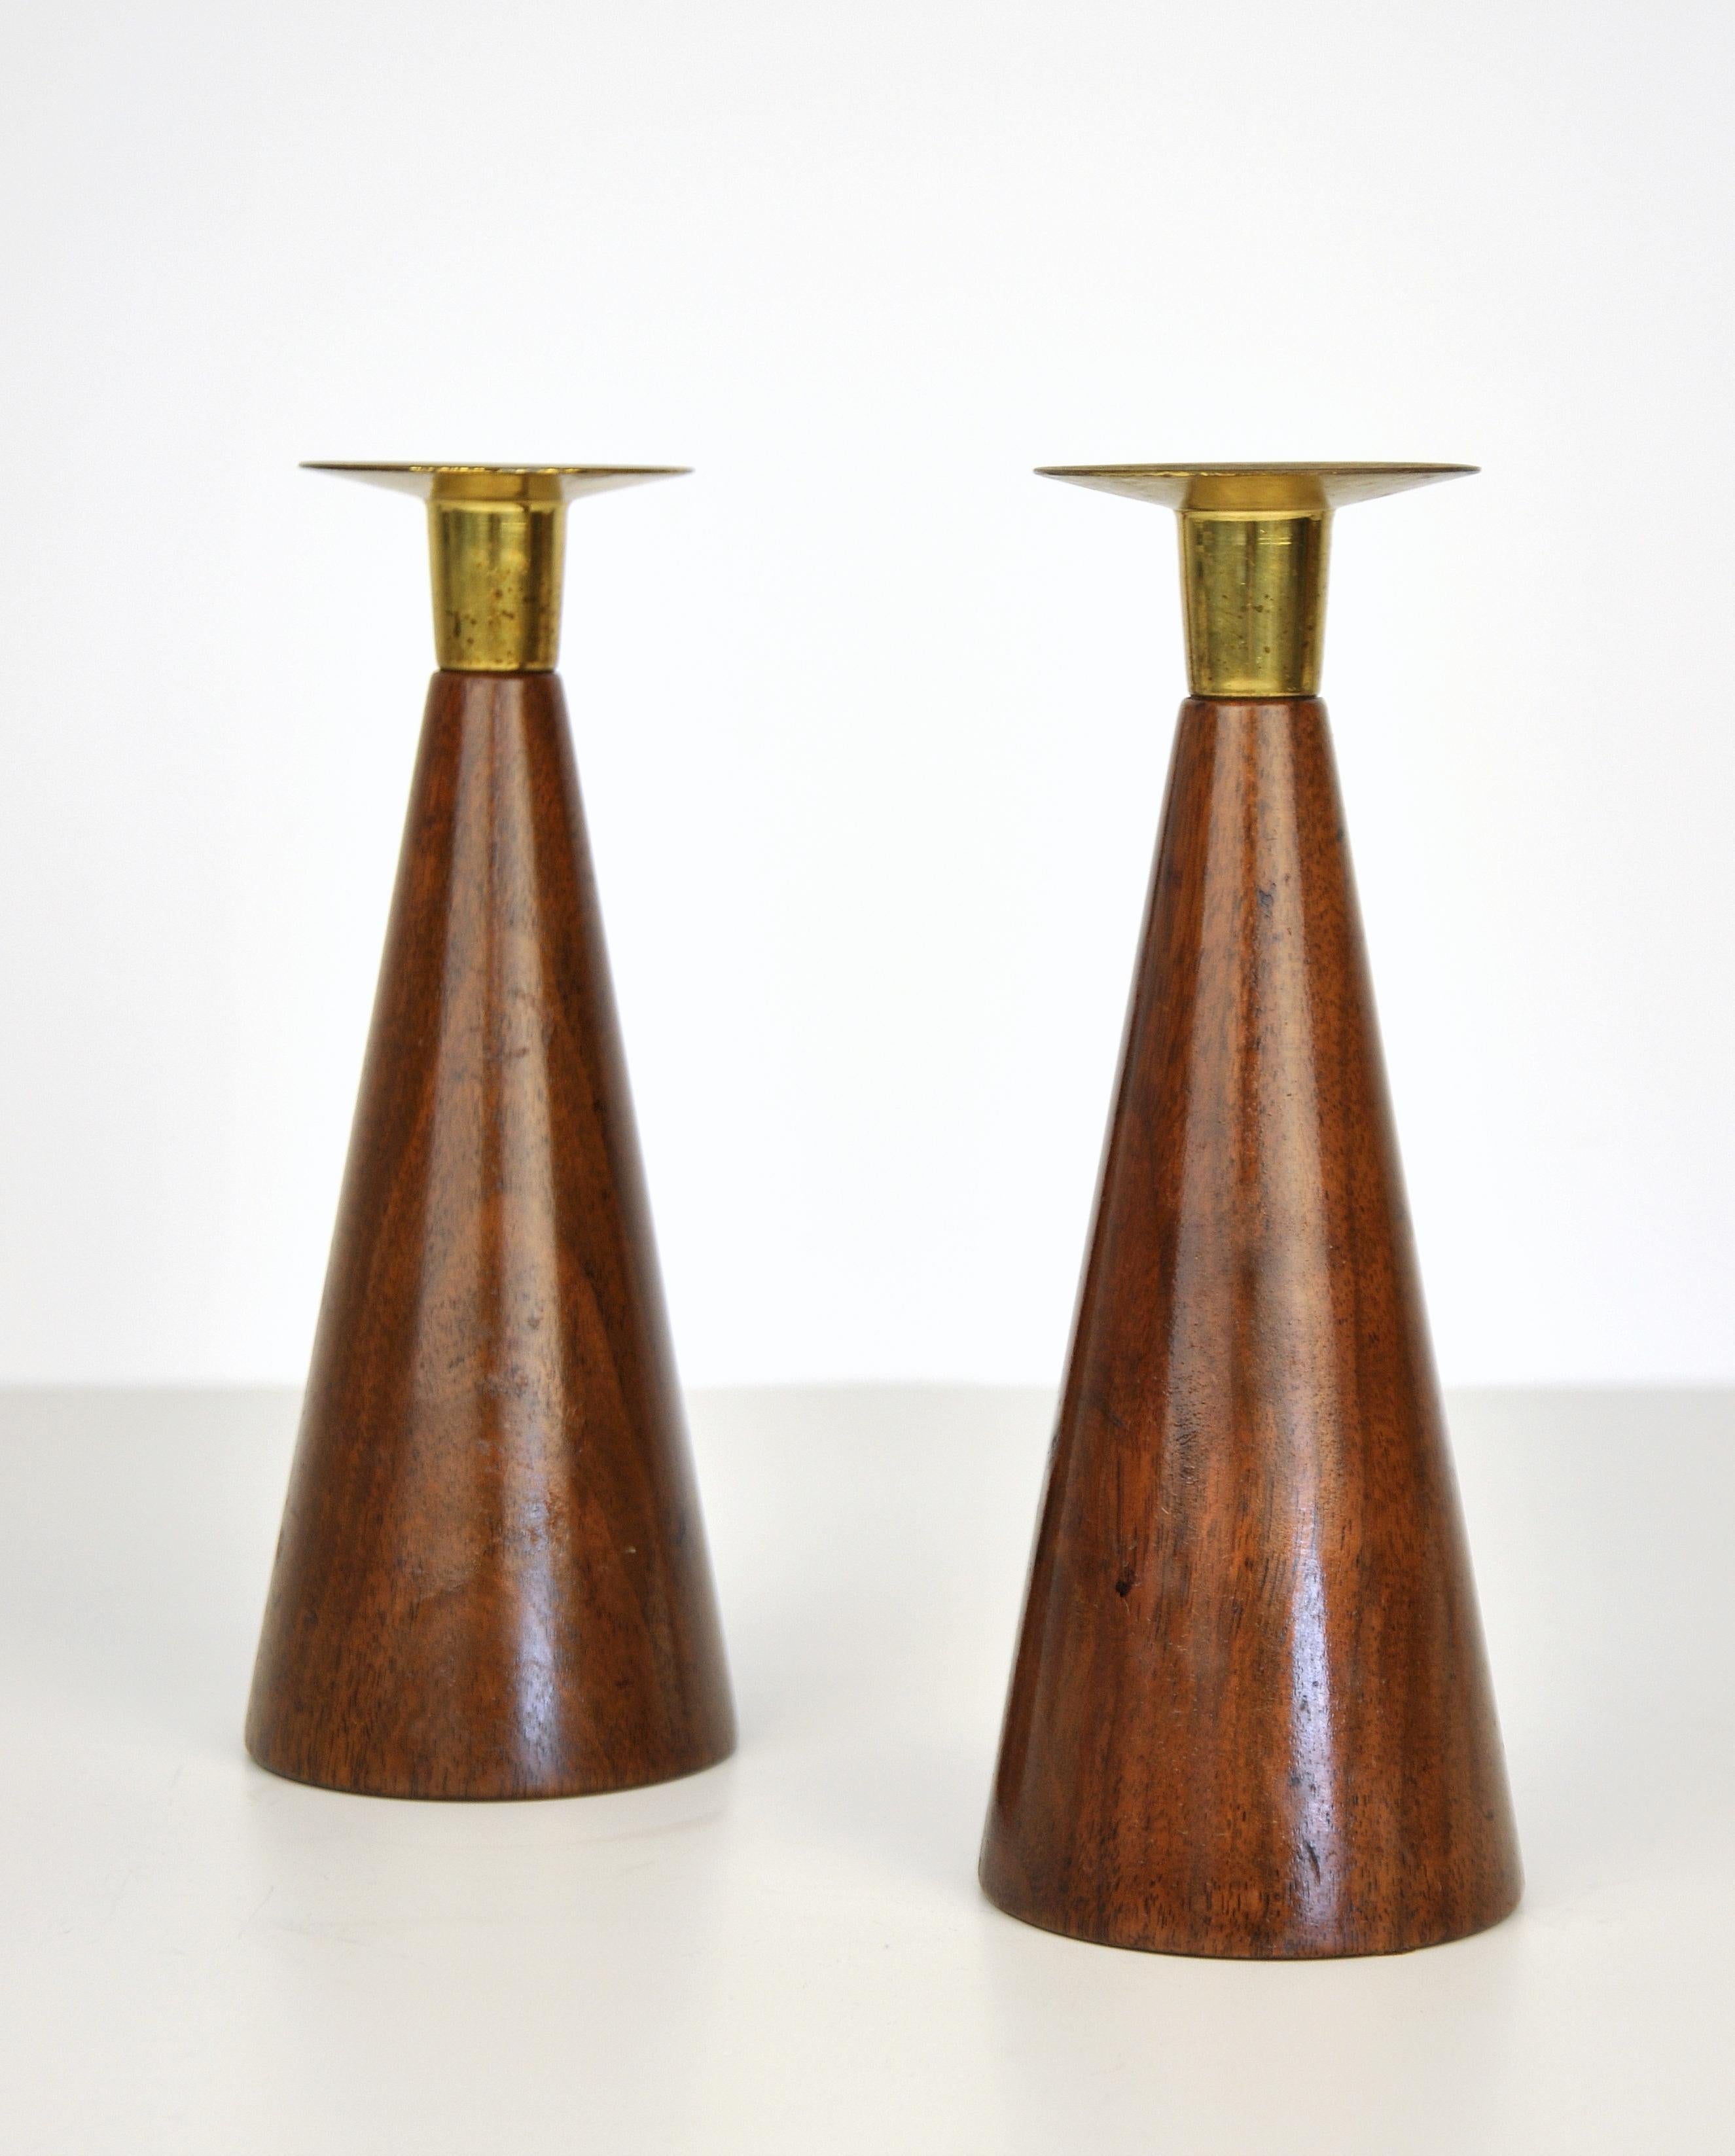 Pair of midcentury modern Tony Paul style cone shaped walnut and brass candleholders. The tapered conical / funnel shaped / pyramid walnut body of the candlestick is topped by a brass bobeche. Work well with midcentury, Scandinavian and organic